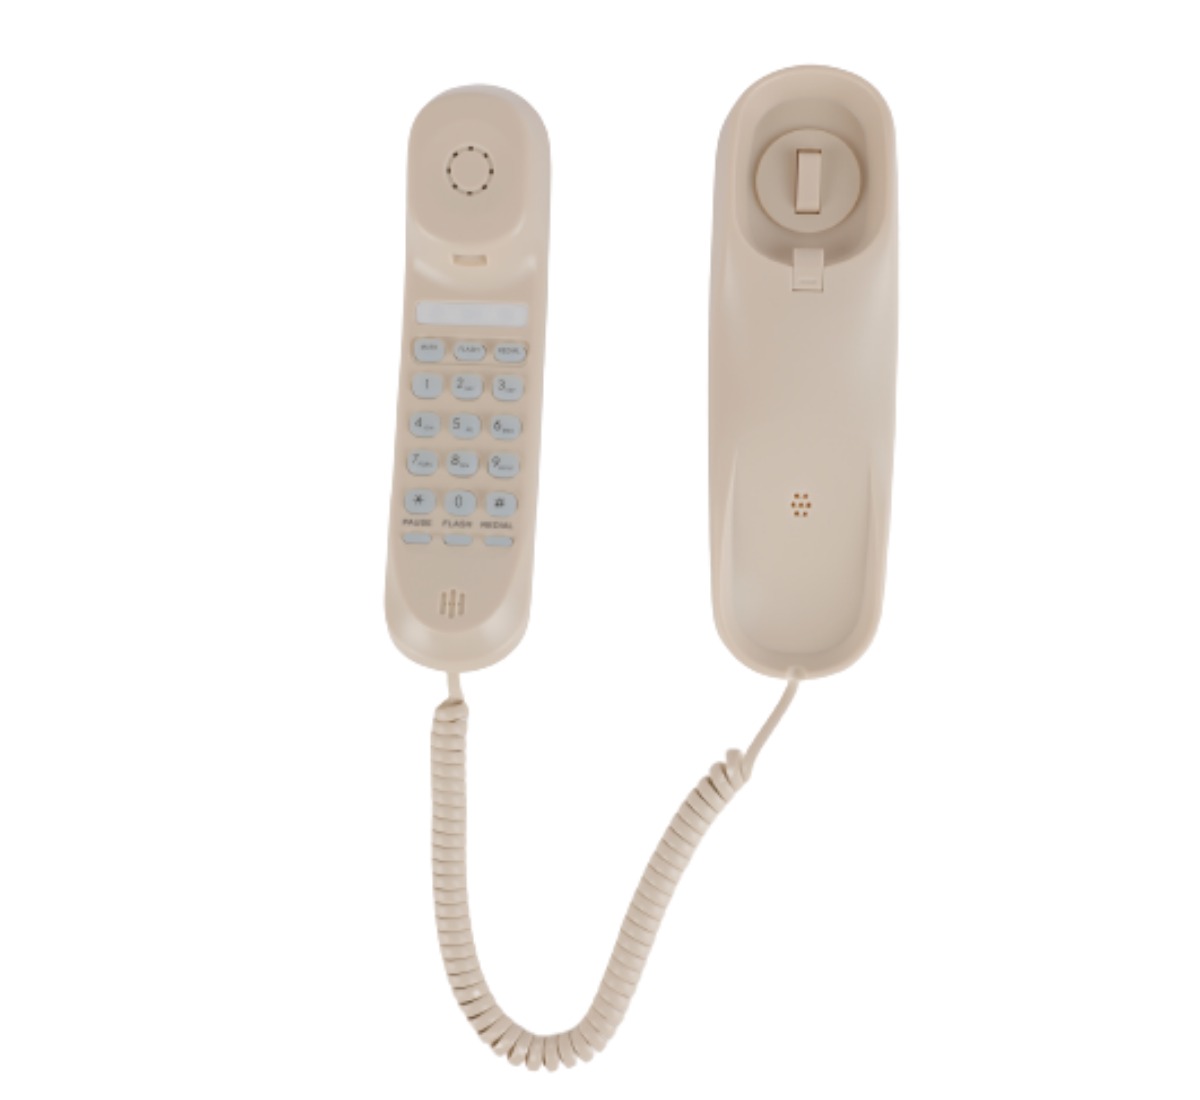 wall Mountable Telephone For Hotel

